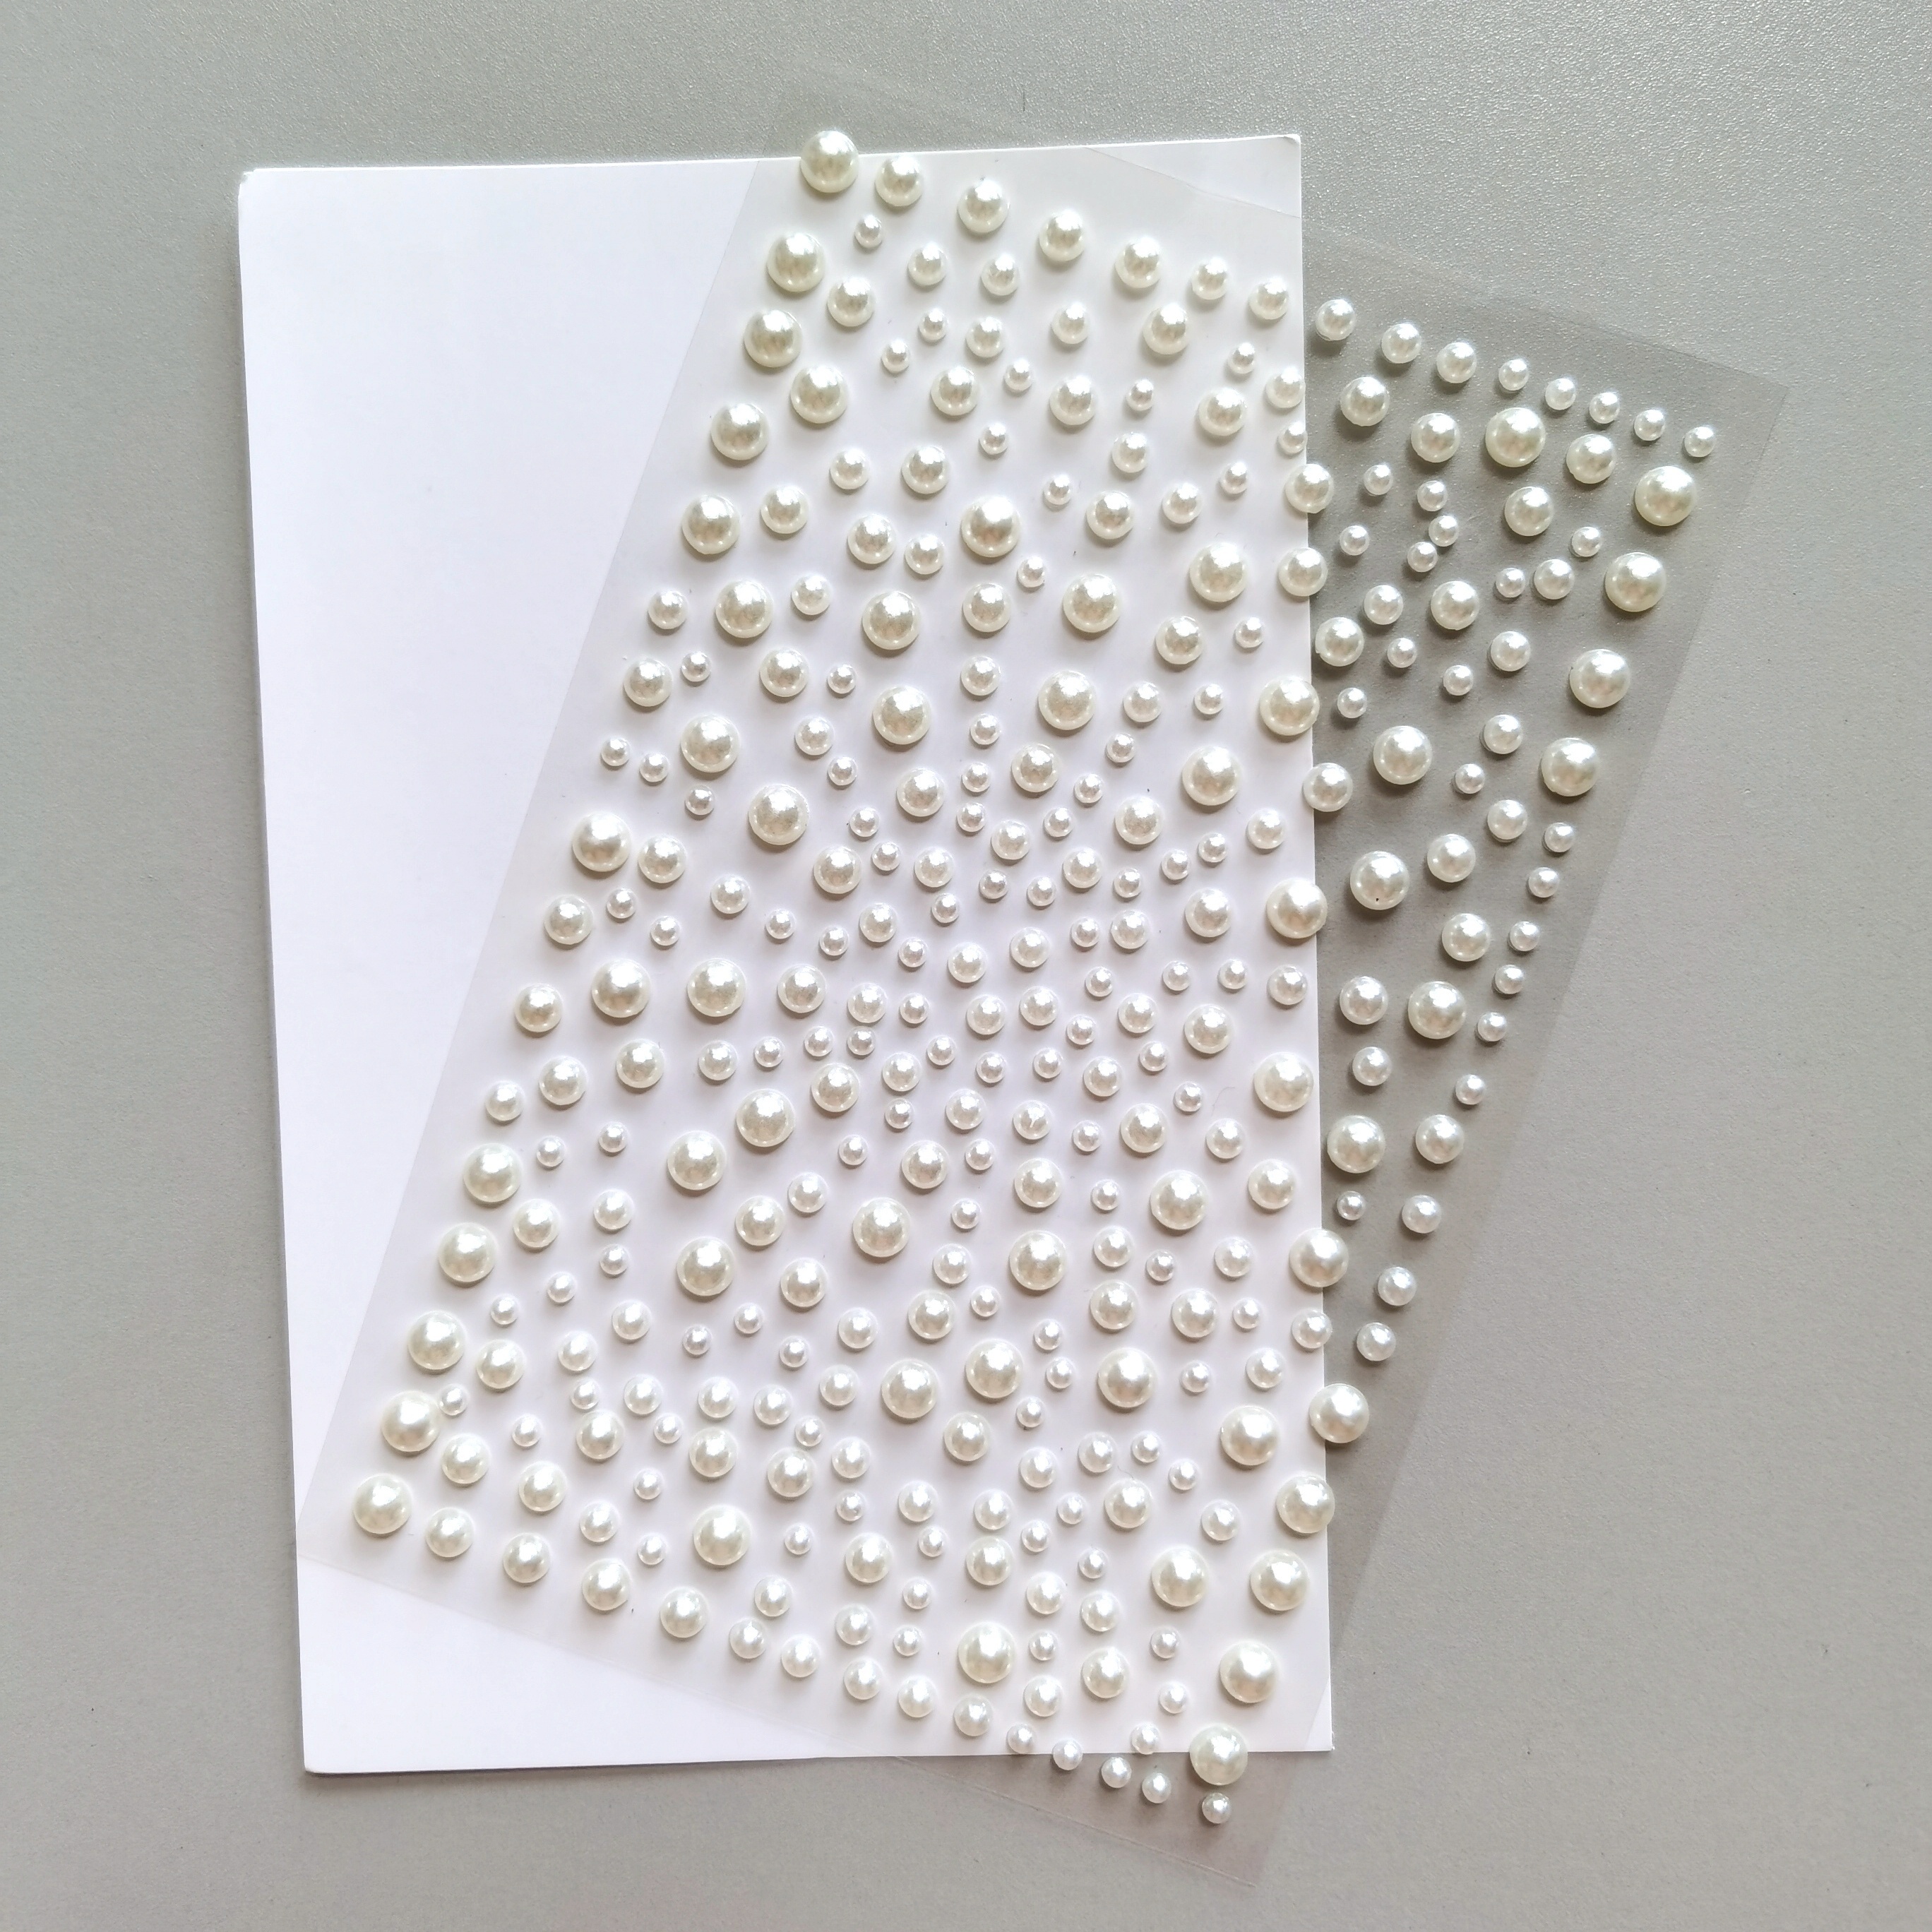 10mm White Pearl Bling Stickers Pearl Bling Sticker Self Adhesive Bling  Stickers White Pearl Bling White Pearl Stickers 45-010 